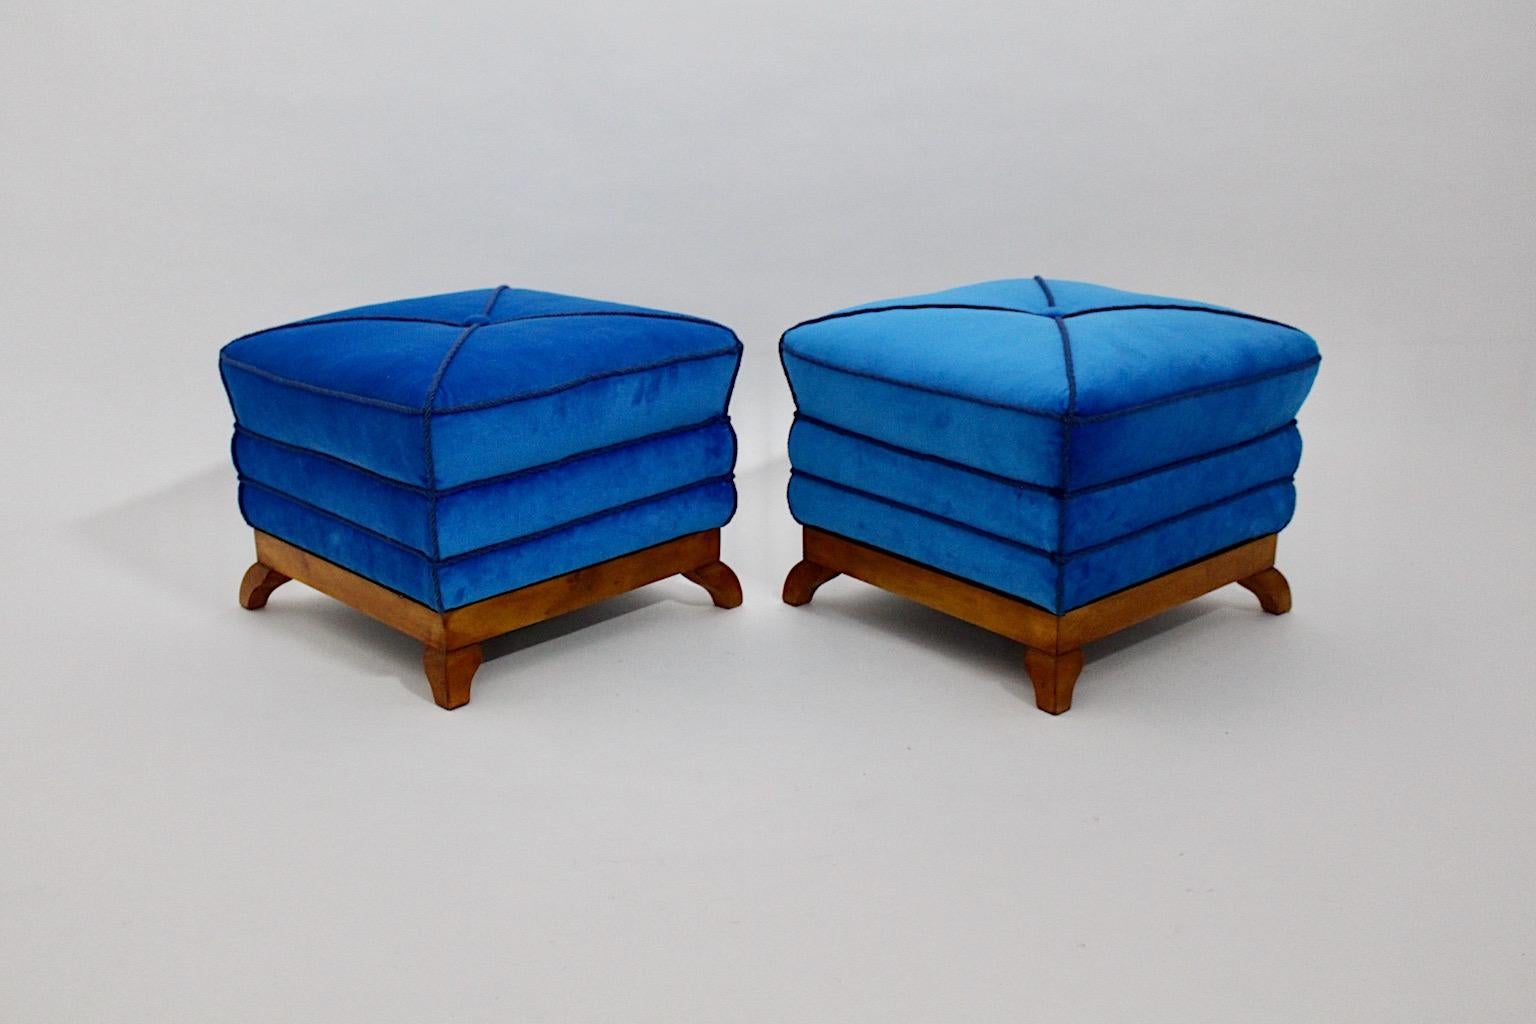 Art Deco vintage pair of stools, poufs or tabouret Dagobert Peche style from maple and blue velvet created and manufactured 1920s Austria.
Wonderful stools in angular form pagoda like reupholstered and refinished, which shows velvet in amazing